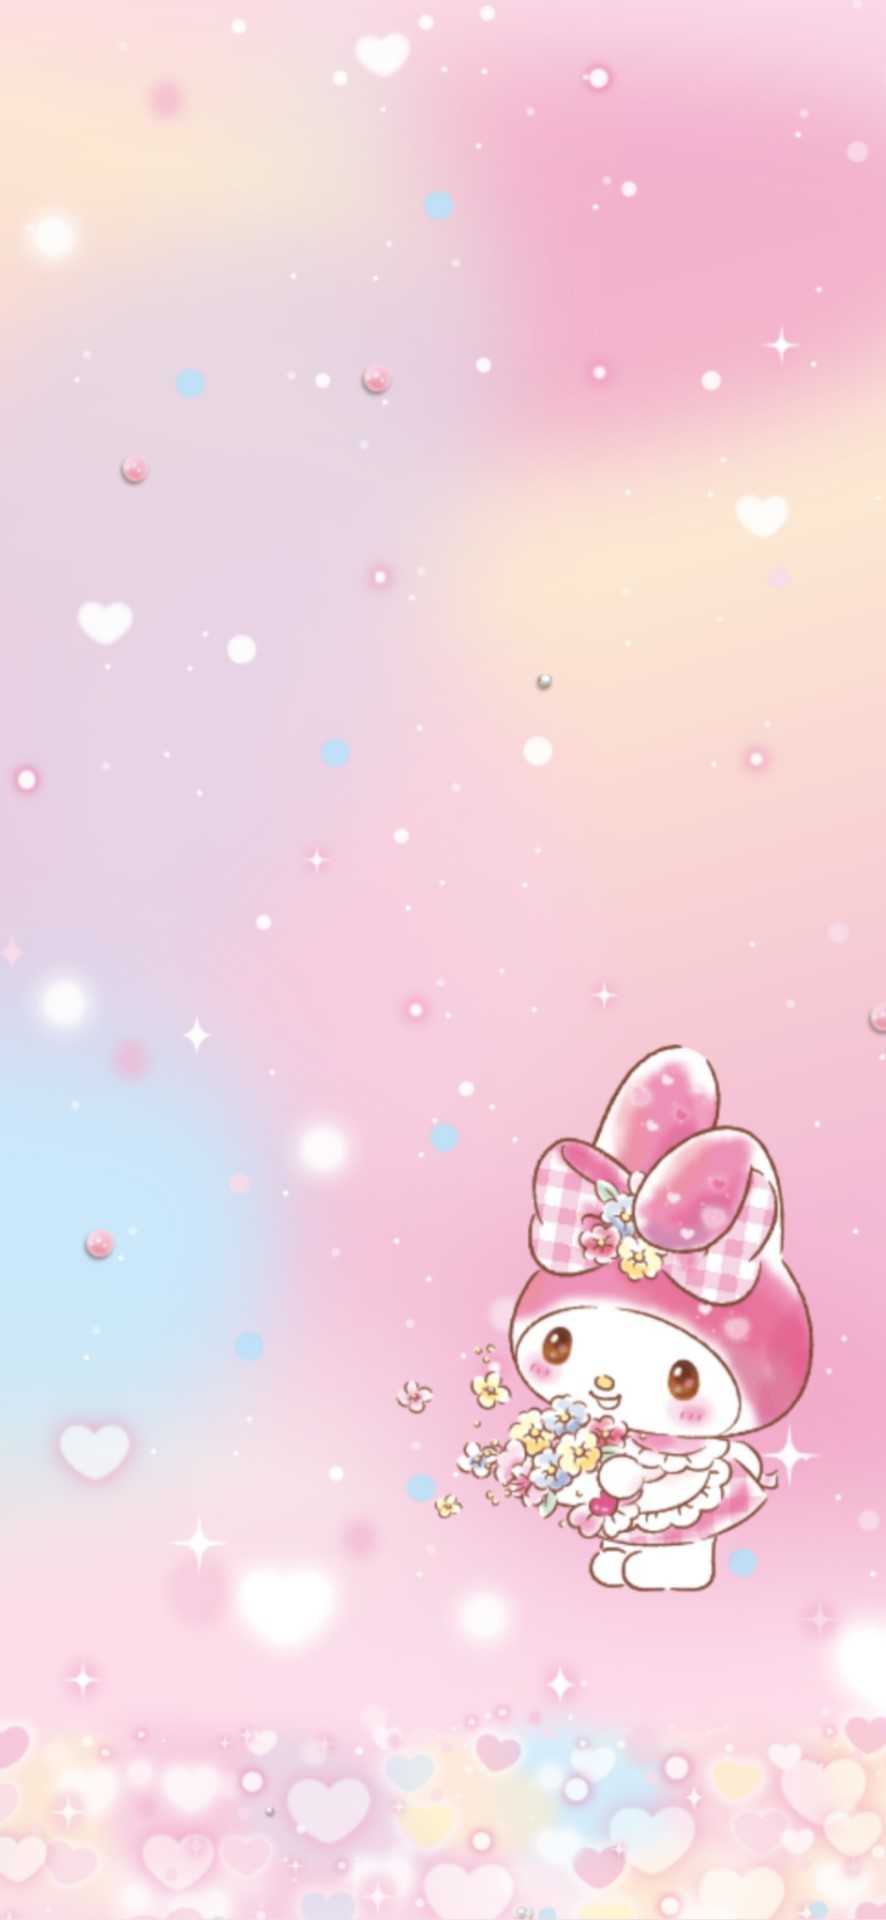 5 New My Melody Phone Wallpapers From Sanrio That Are Free  GirlStyle  Singapore